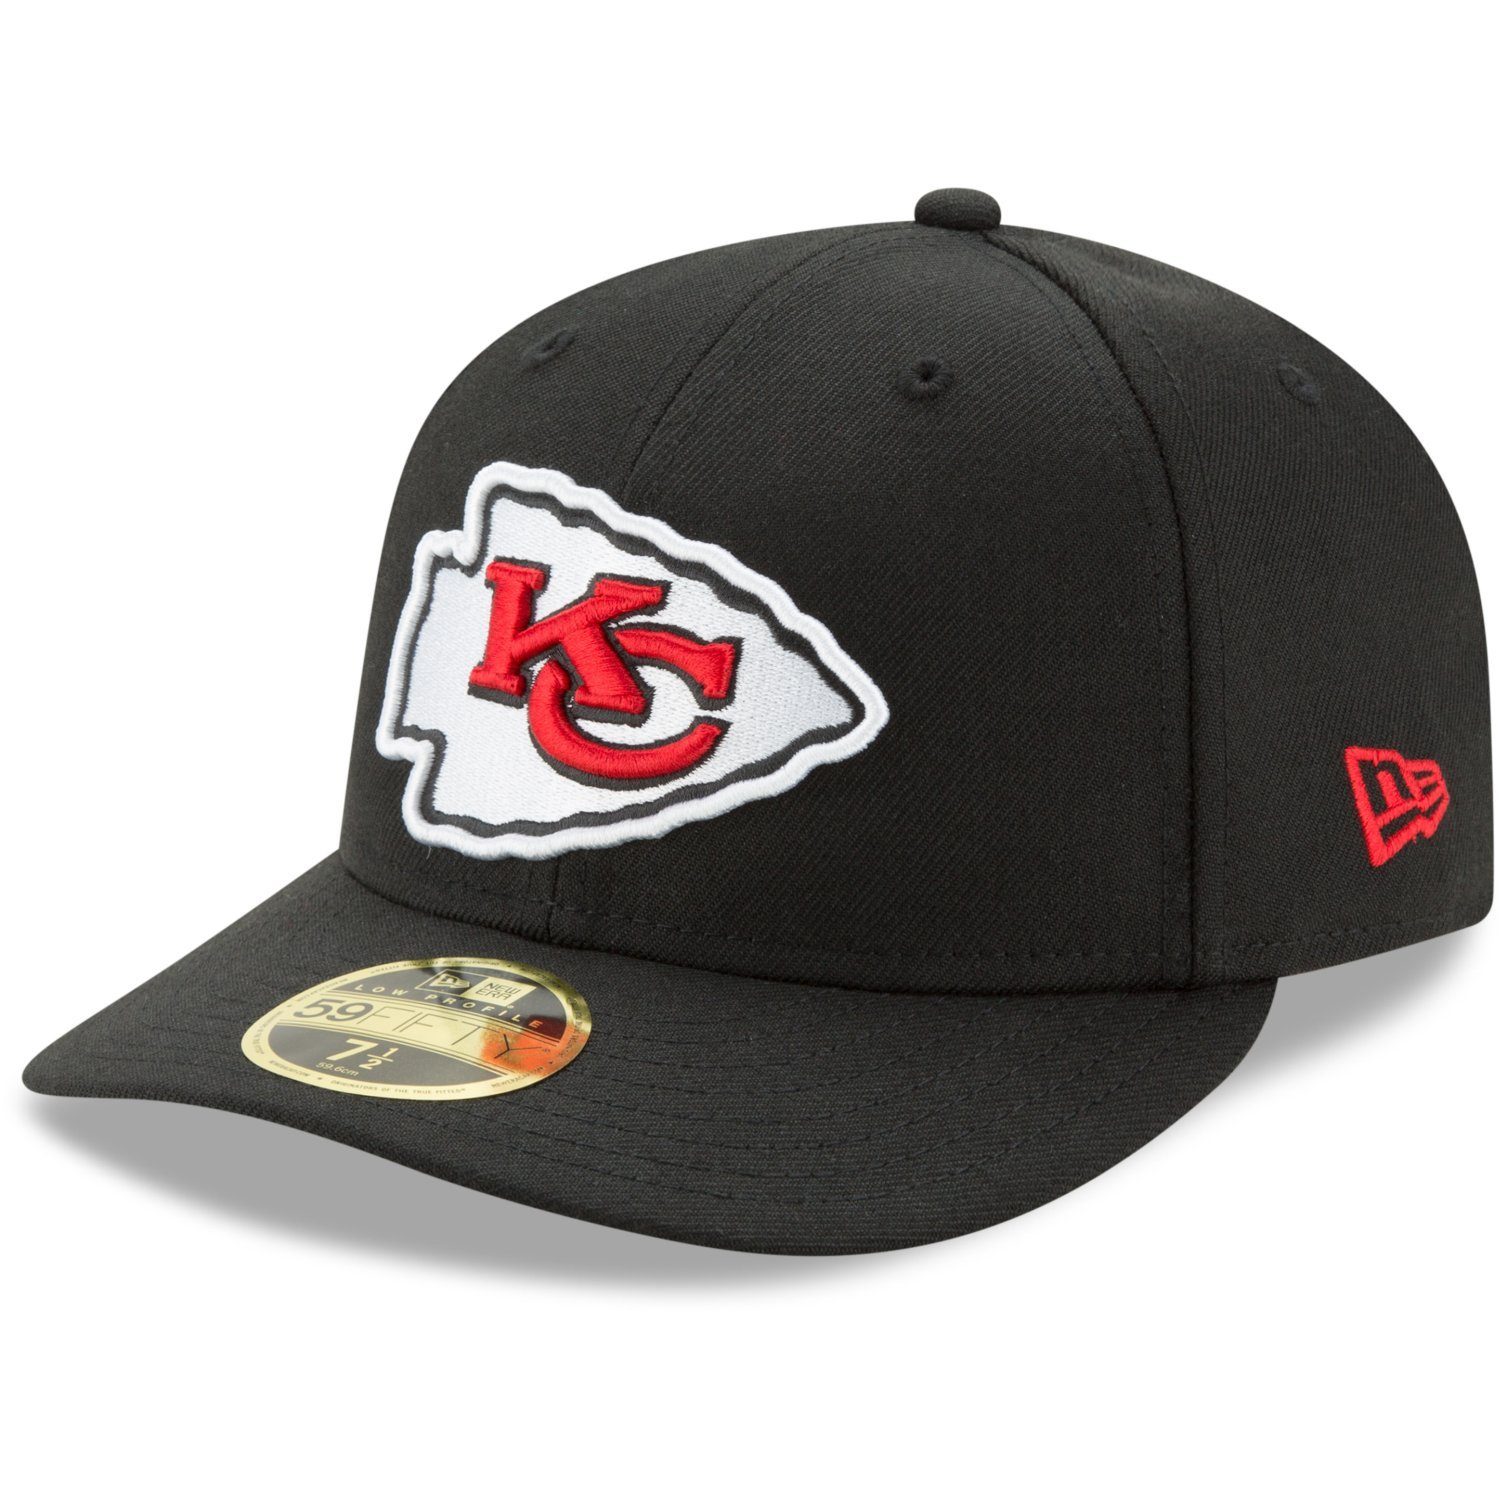 59Fifty Cap LOW Era City Kansas PROFILE Fitted New Chiefs